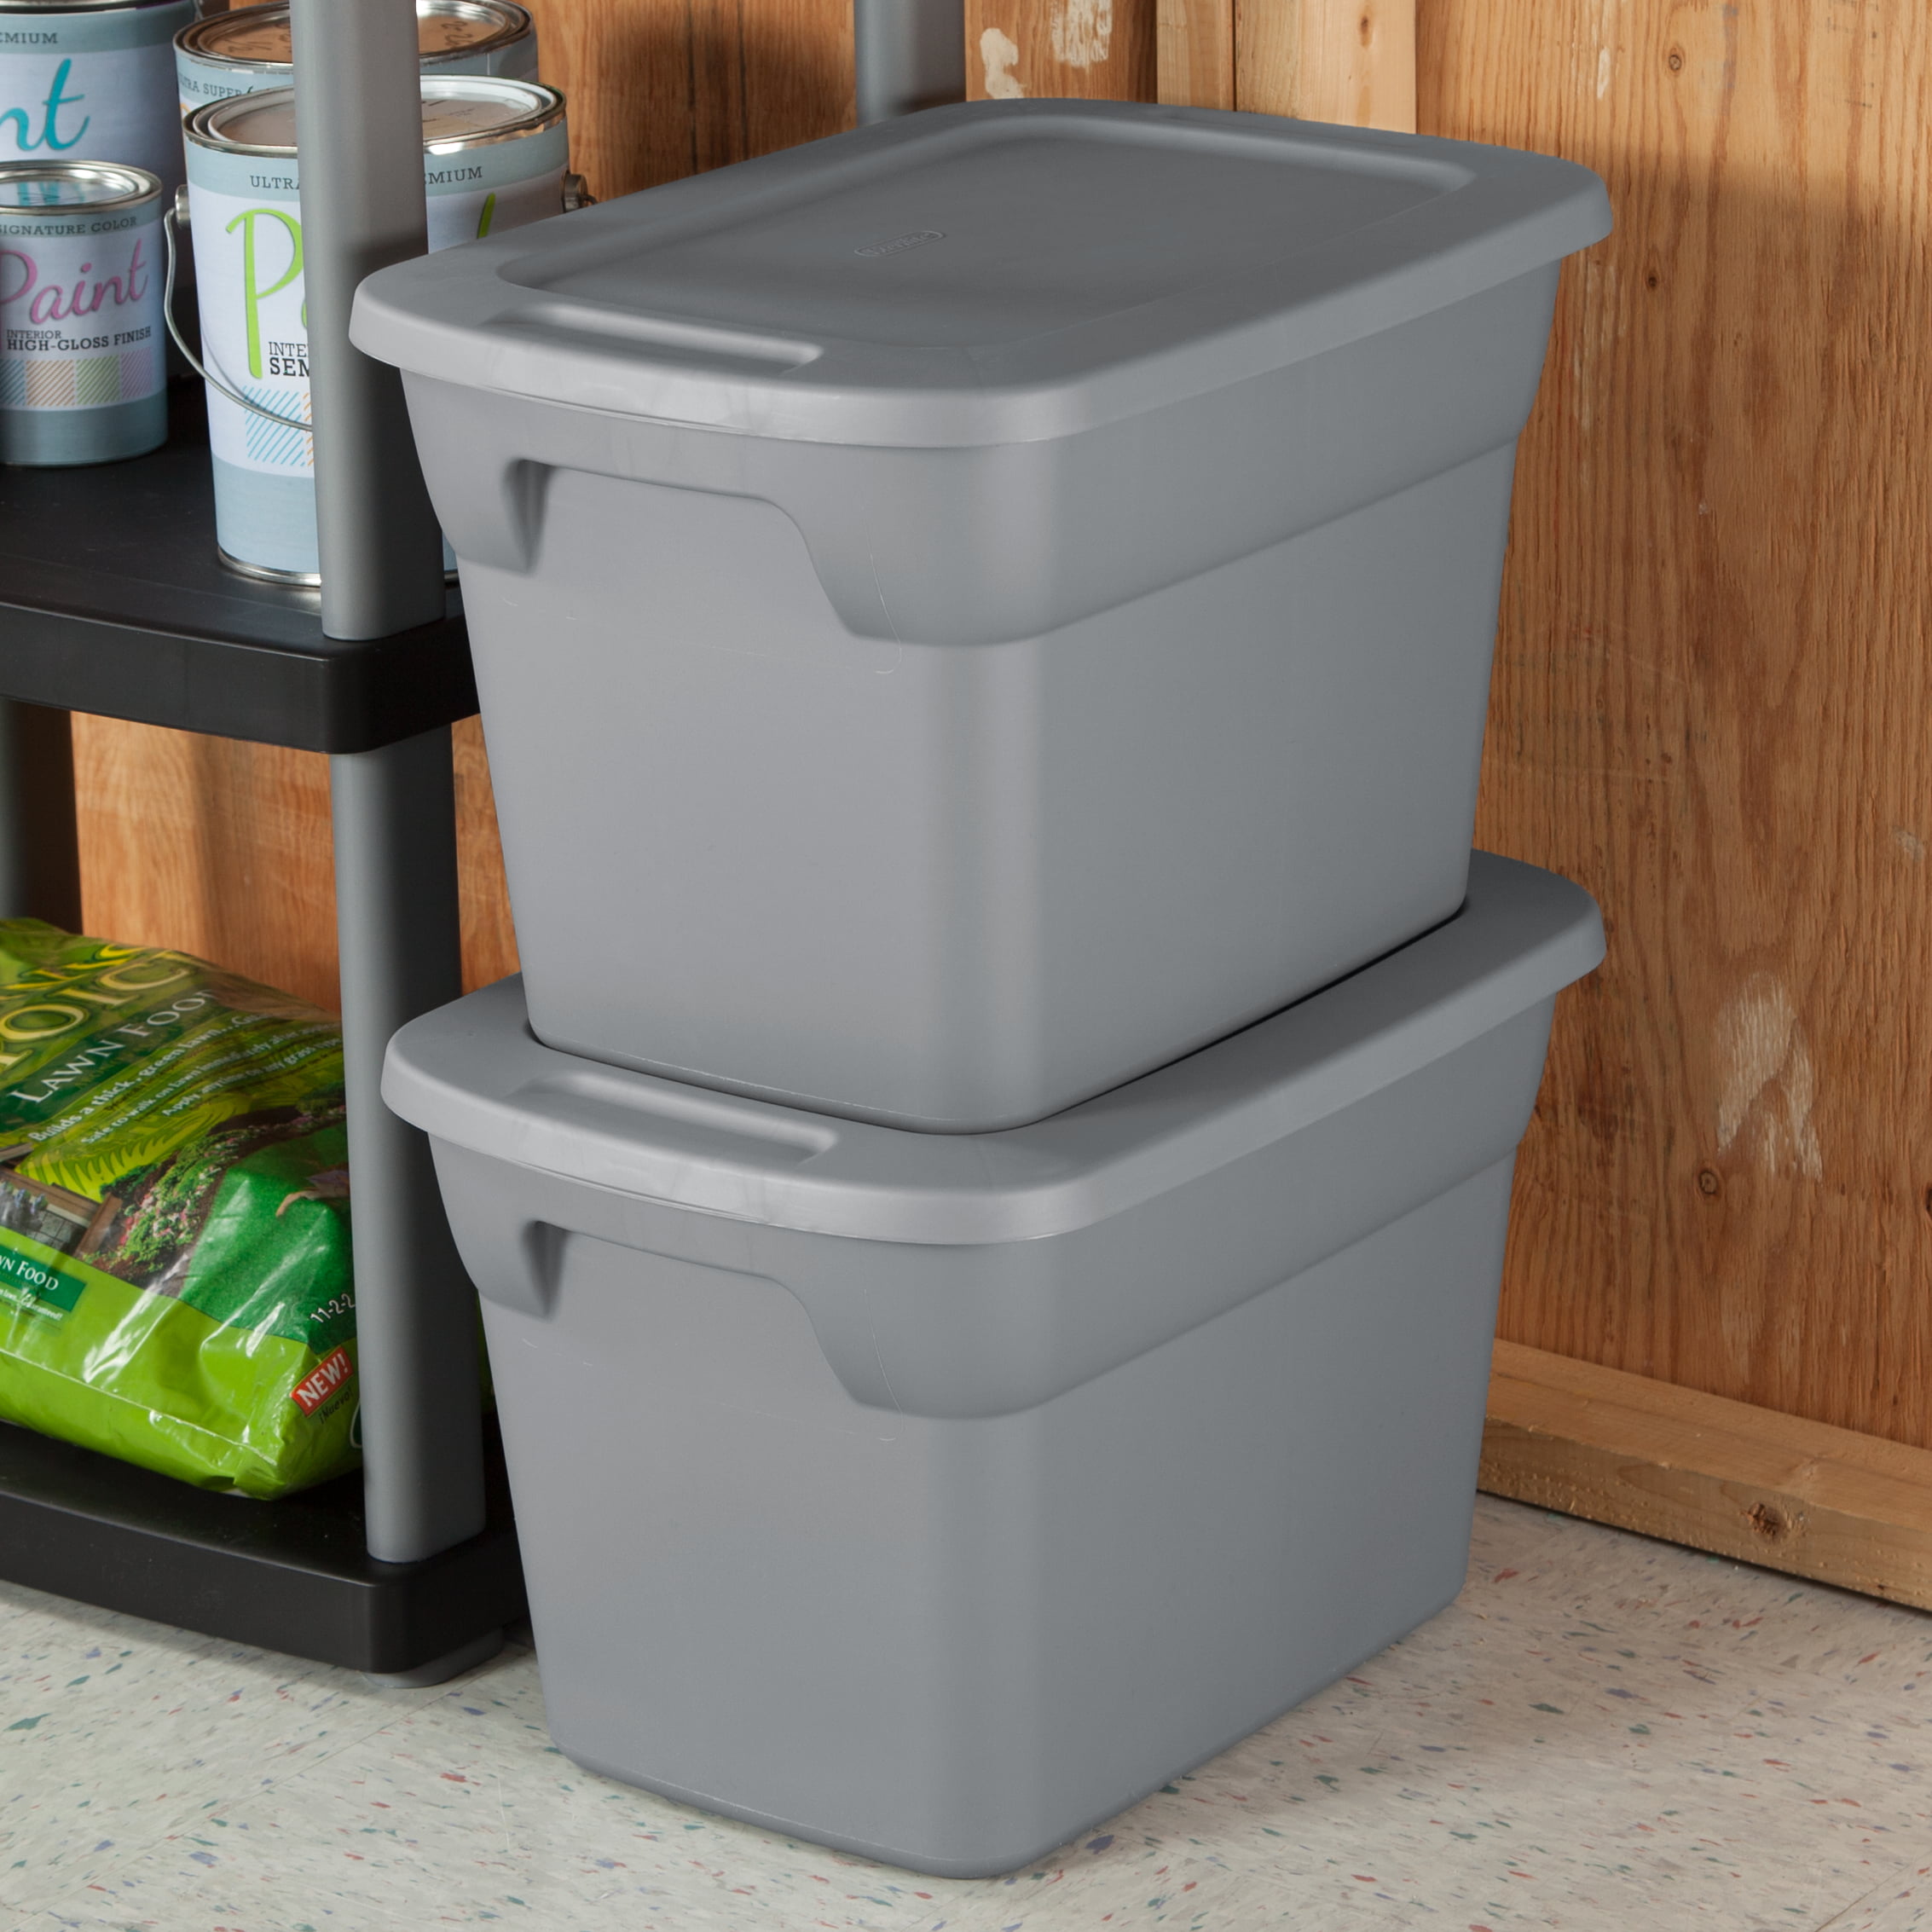 Sterilite 10 Gallon Industrial Stacker Storage Totes w/ Gray Clip Lids (24  Pack) - Bed Bath & Beyond - 36069680